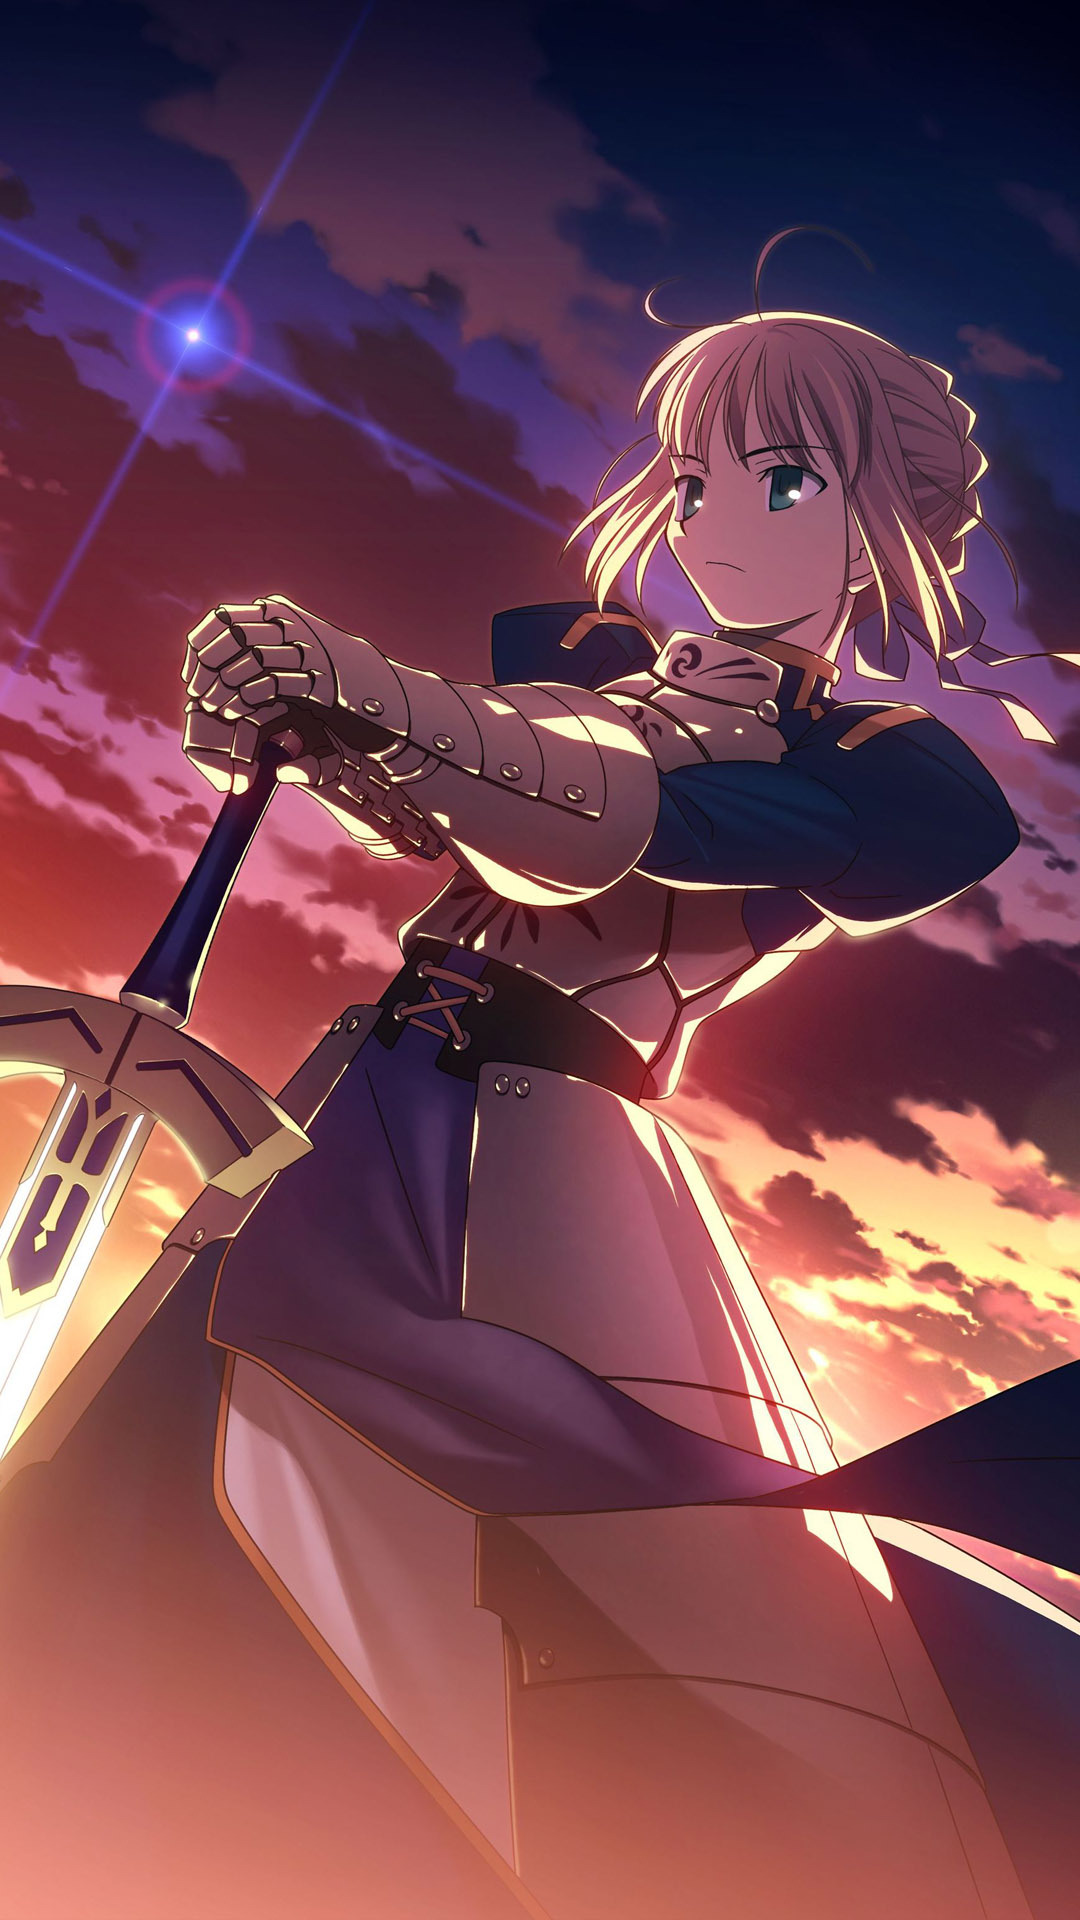 Fate Stay Night Iphone6壁紙 Iphone Wallpapers